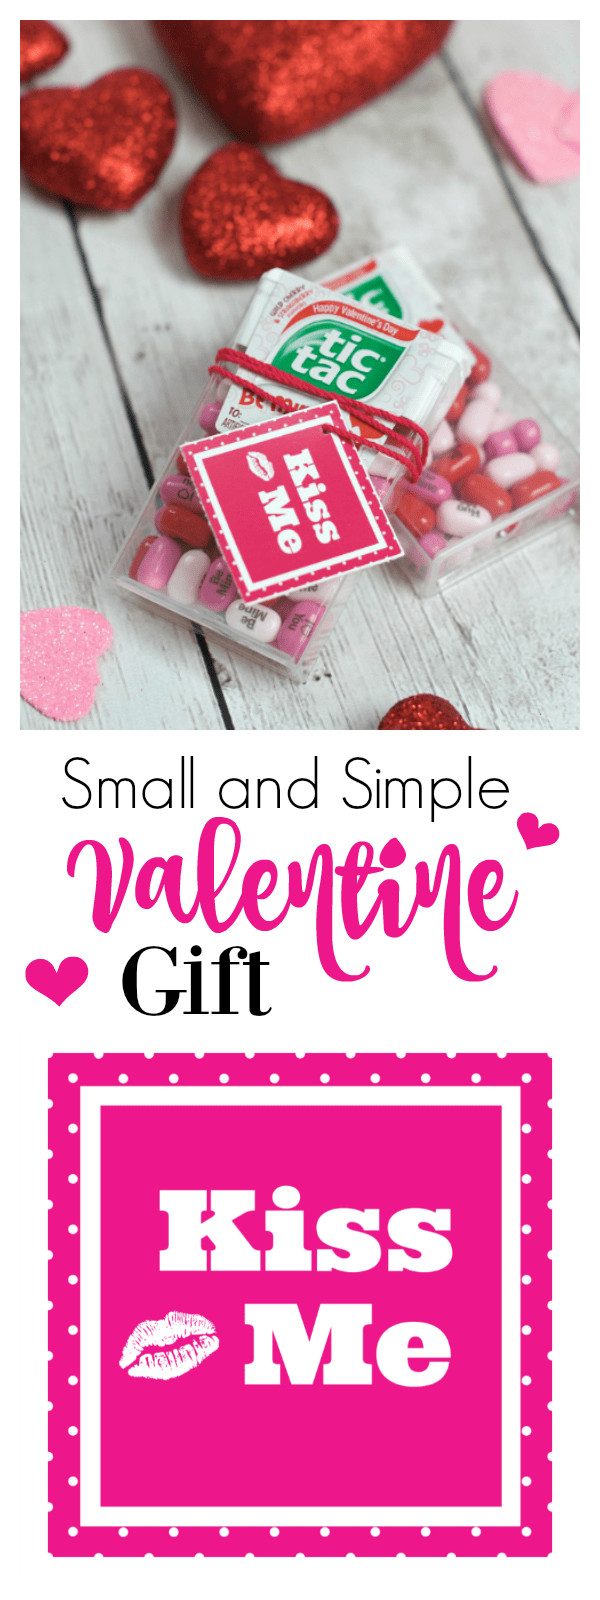 Valentines Day Small Gift Ideas
 Simple & Small Valentine Gift Kiss Me Valentine – Fun Squared